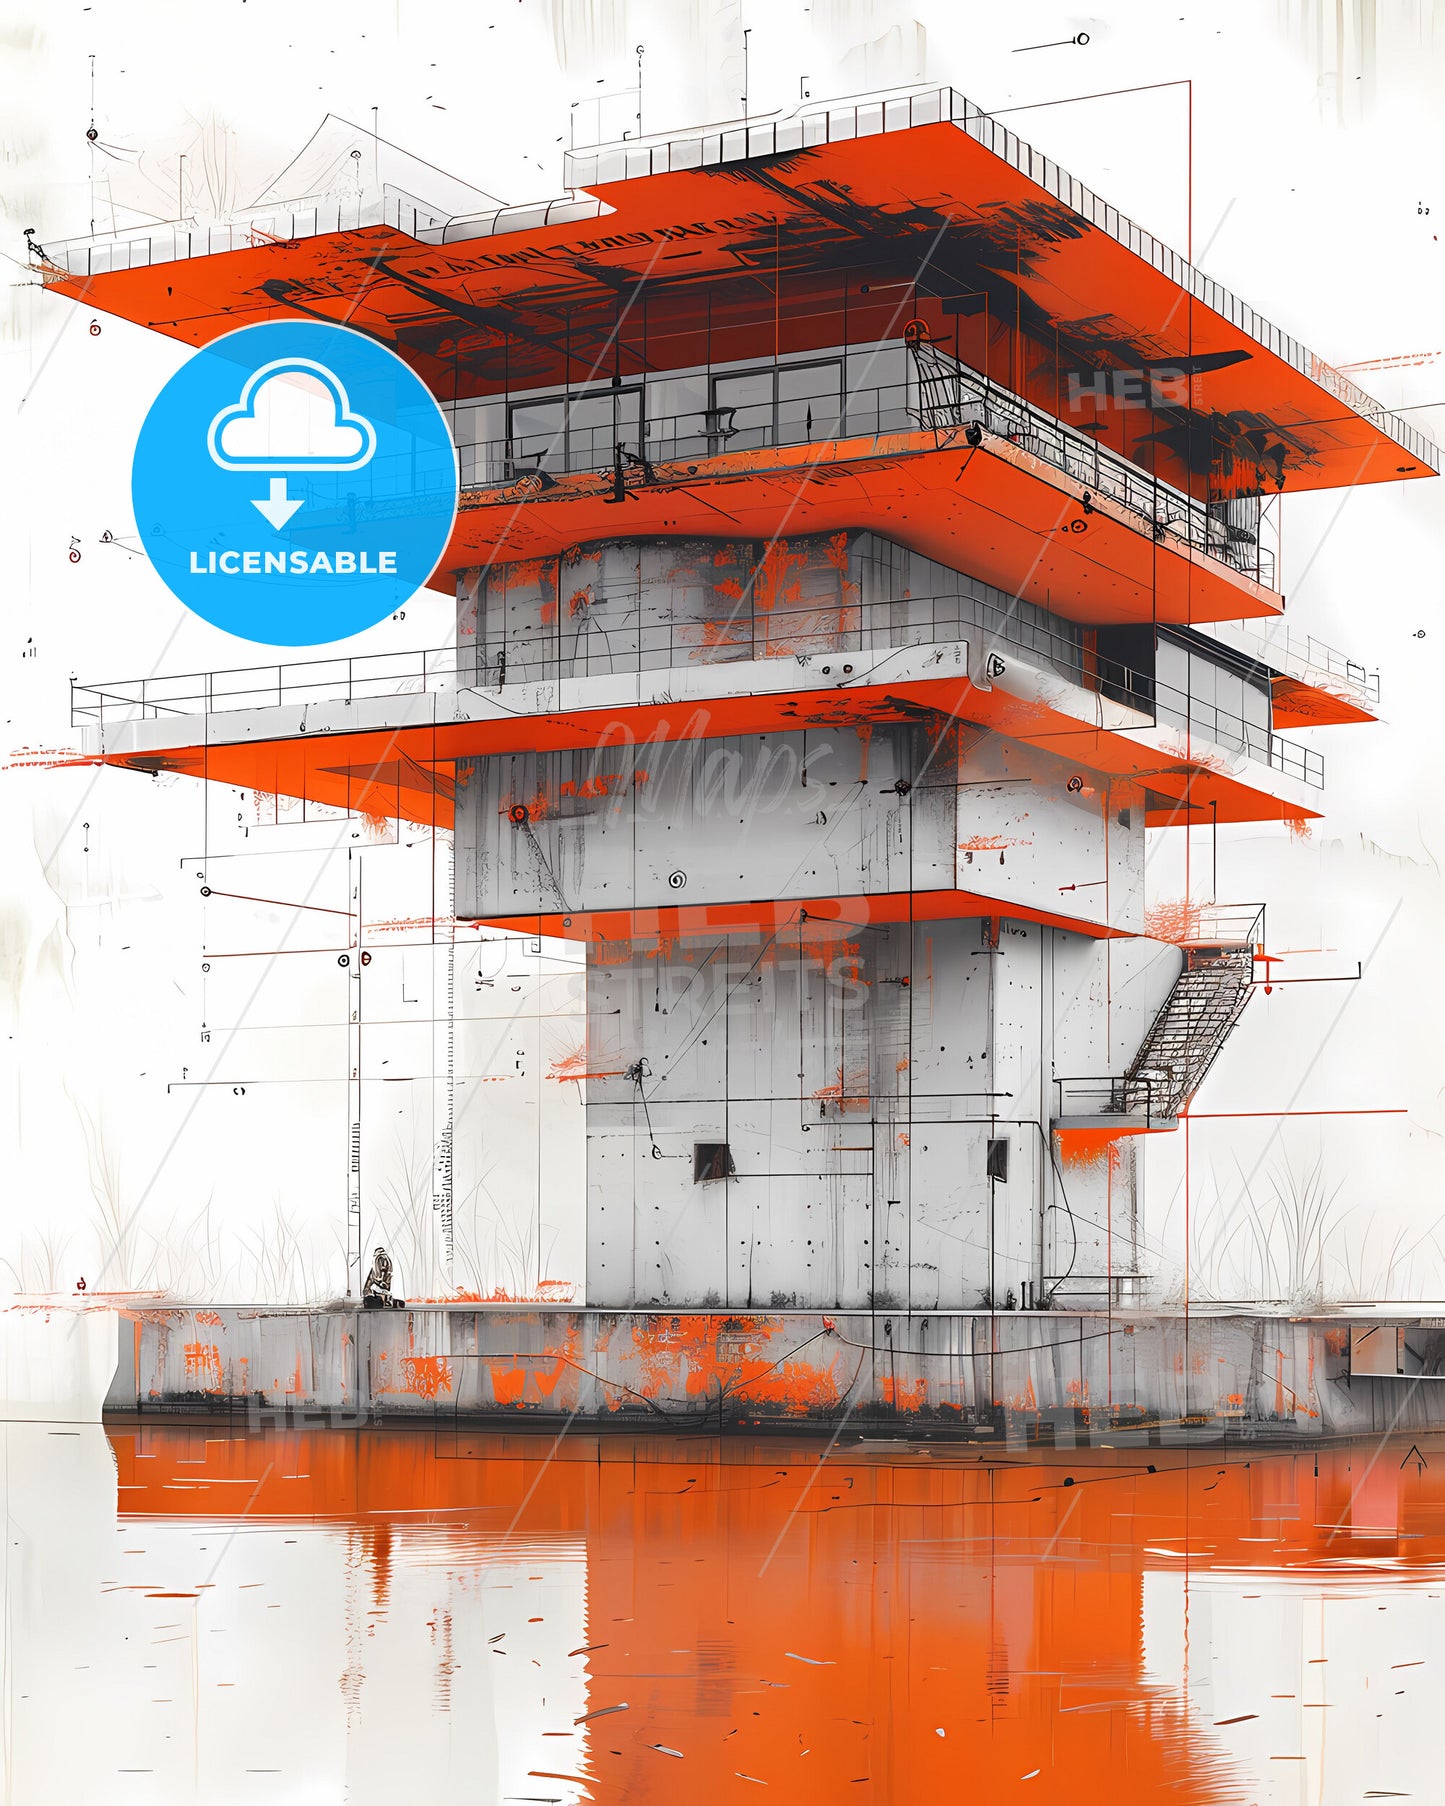 Architectural Precision and Modern Sleekness: A Color Splash Painting with Nautical Detail and Multiple Exposures Featuring an Orange Building